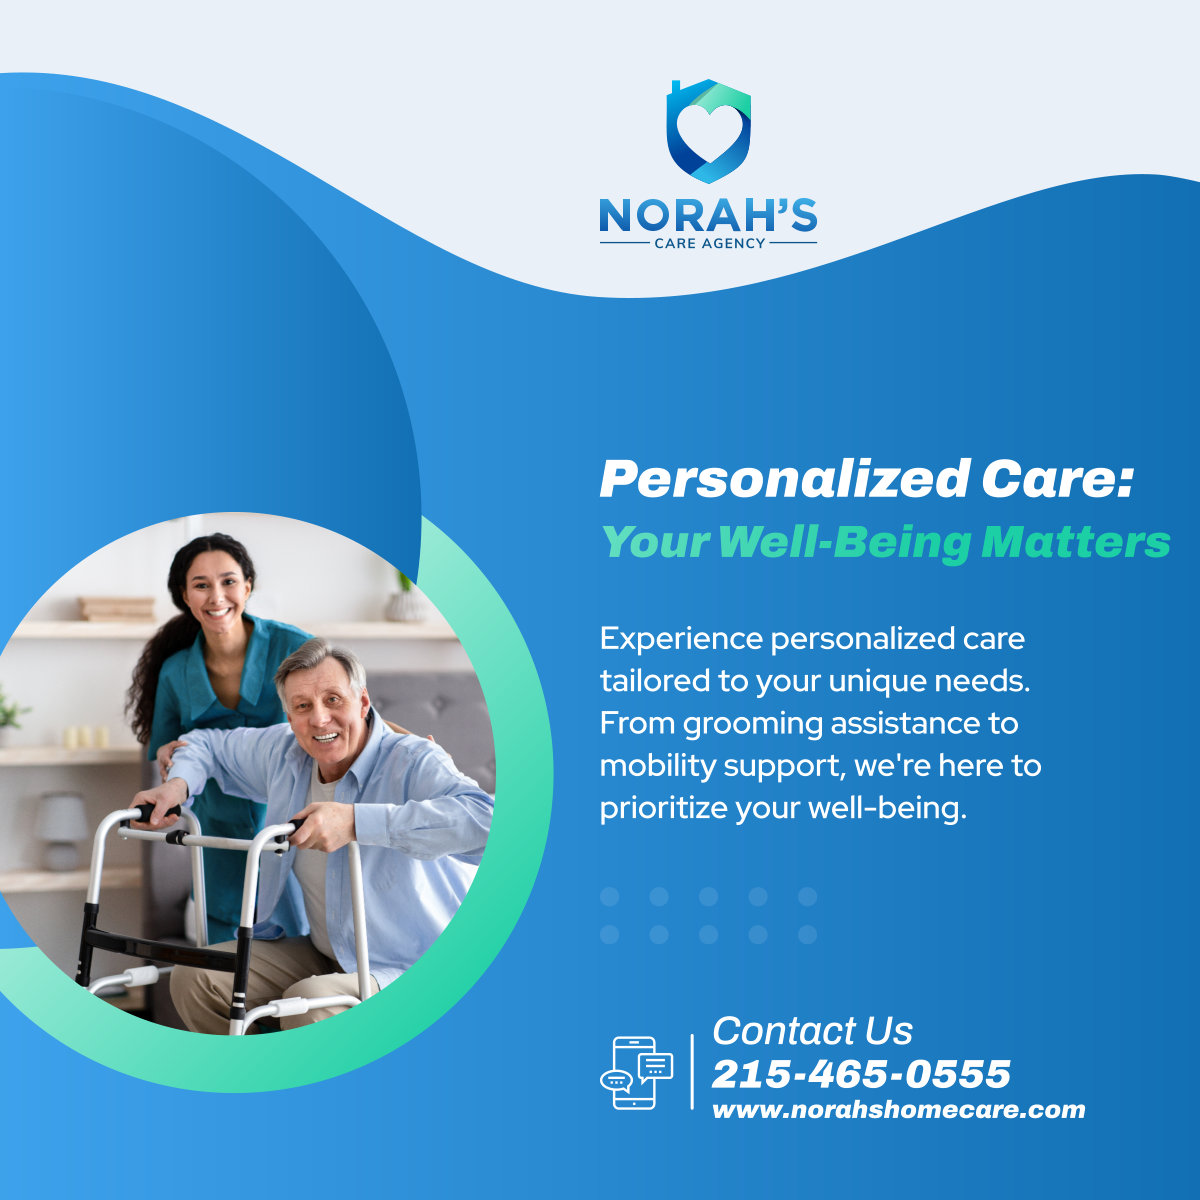 Your well-being is our top priority. Let us provide the care you deserve. Contact us today to discuss your personalized care plan. 

#HomeCare #PhiladelphiaPA #PersonalCare